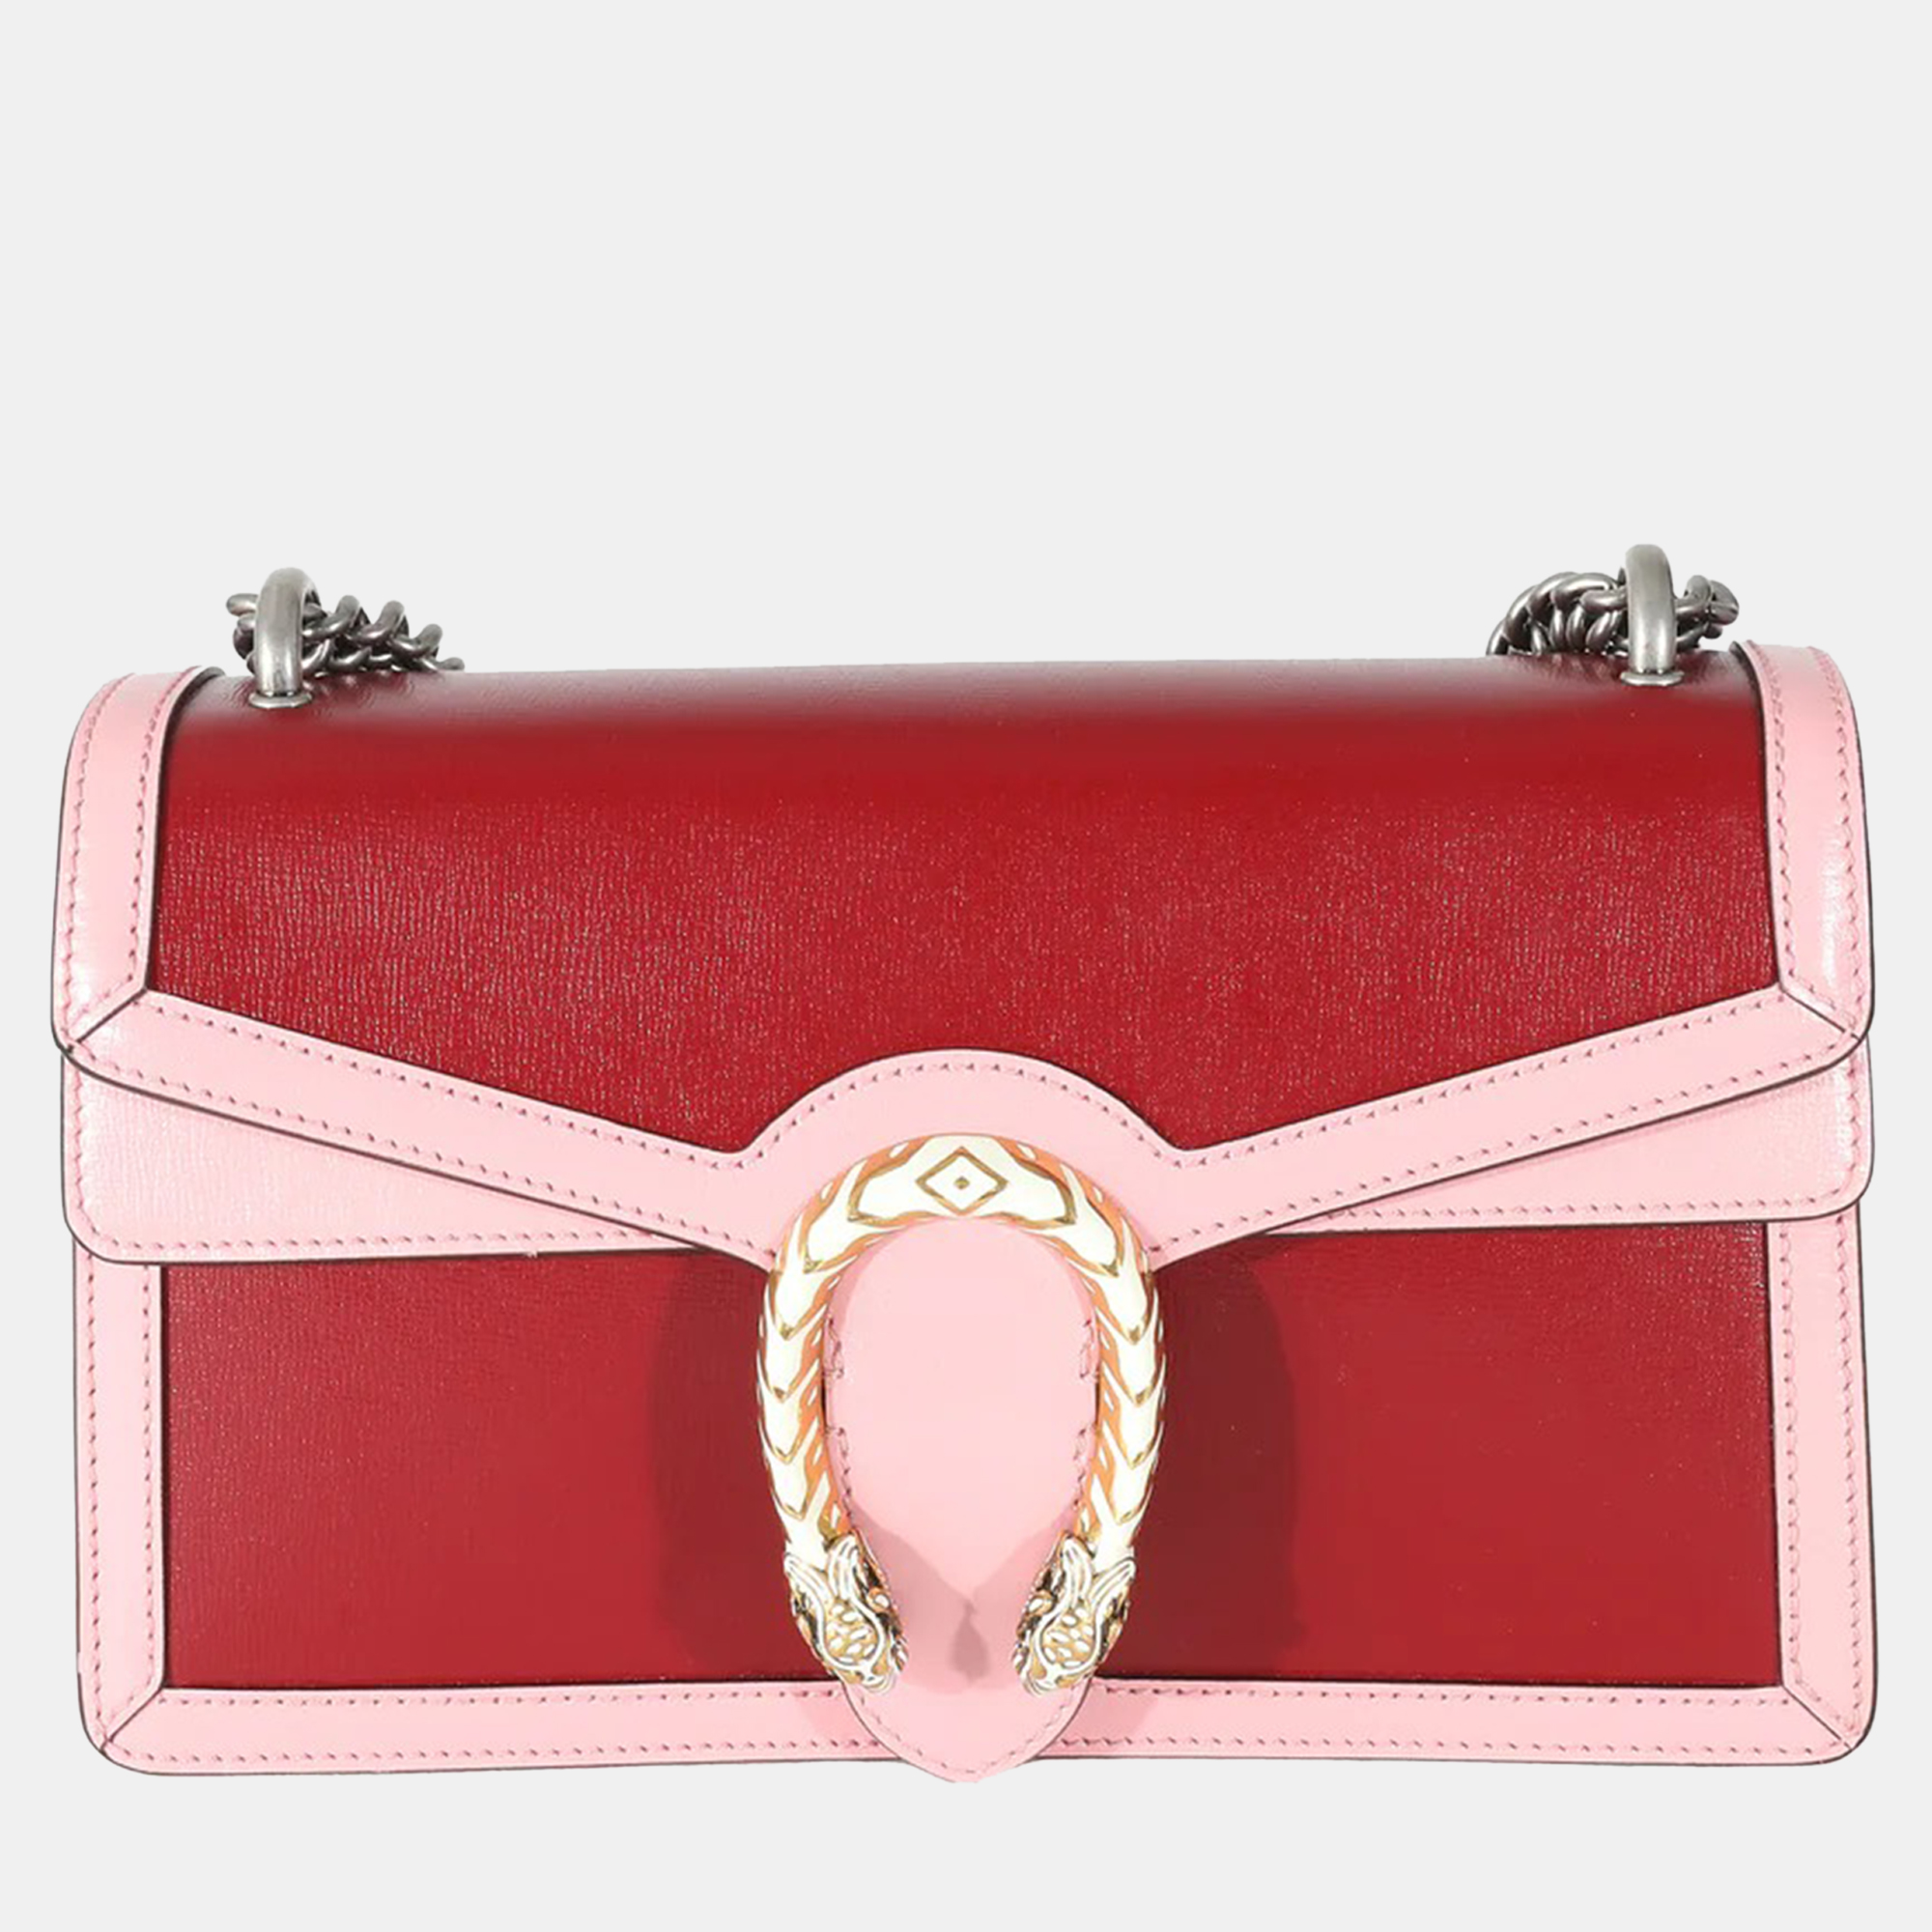 Gucci pink leather small dionysus shoulder bag